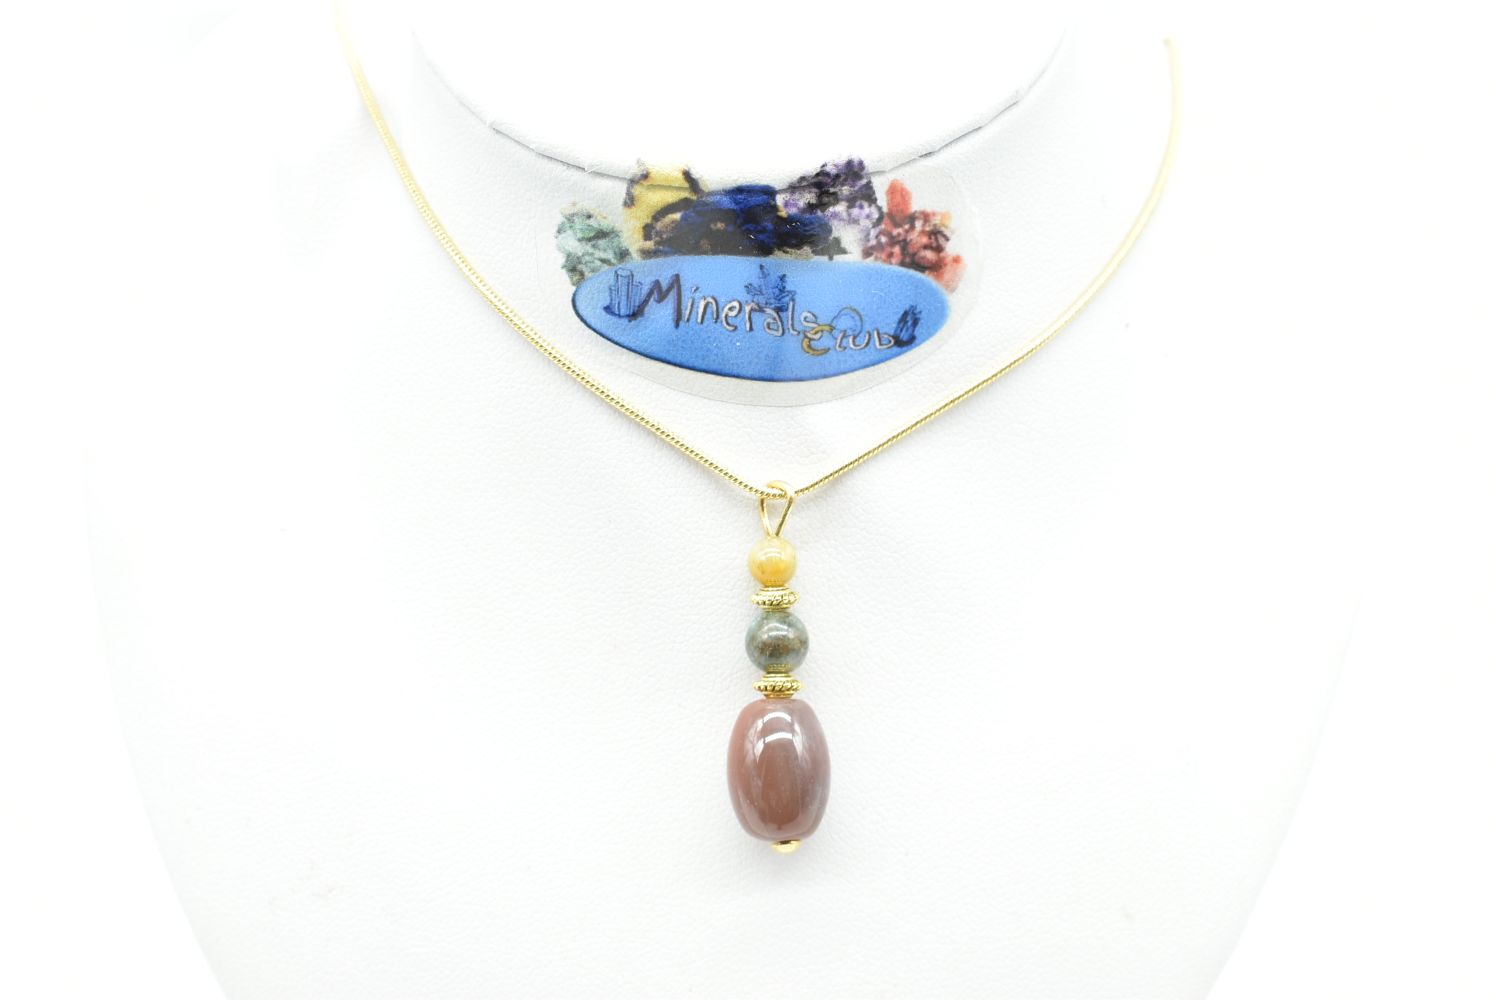 Agate pendant in various colors